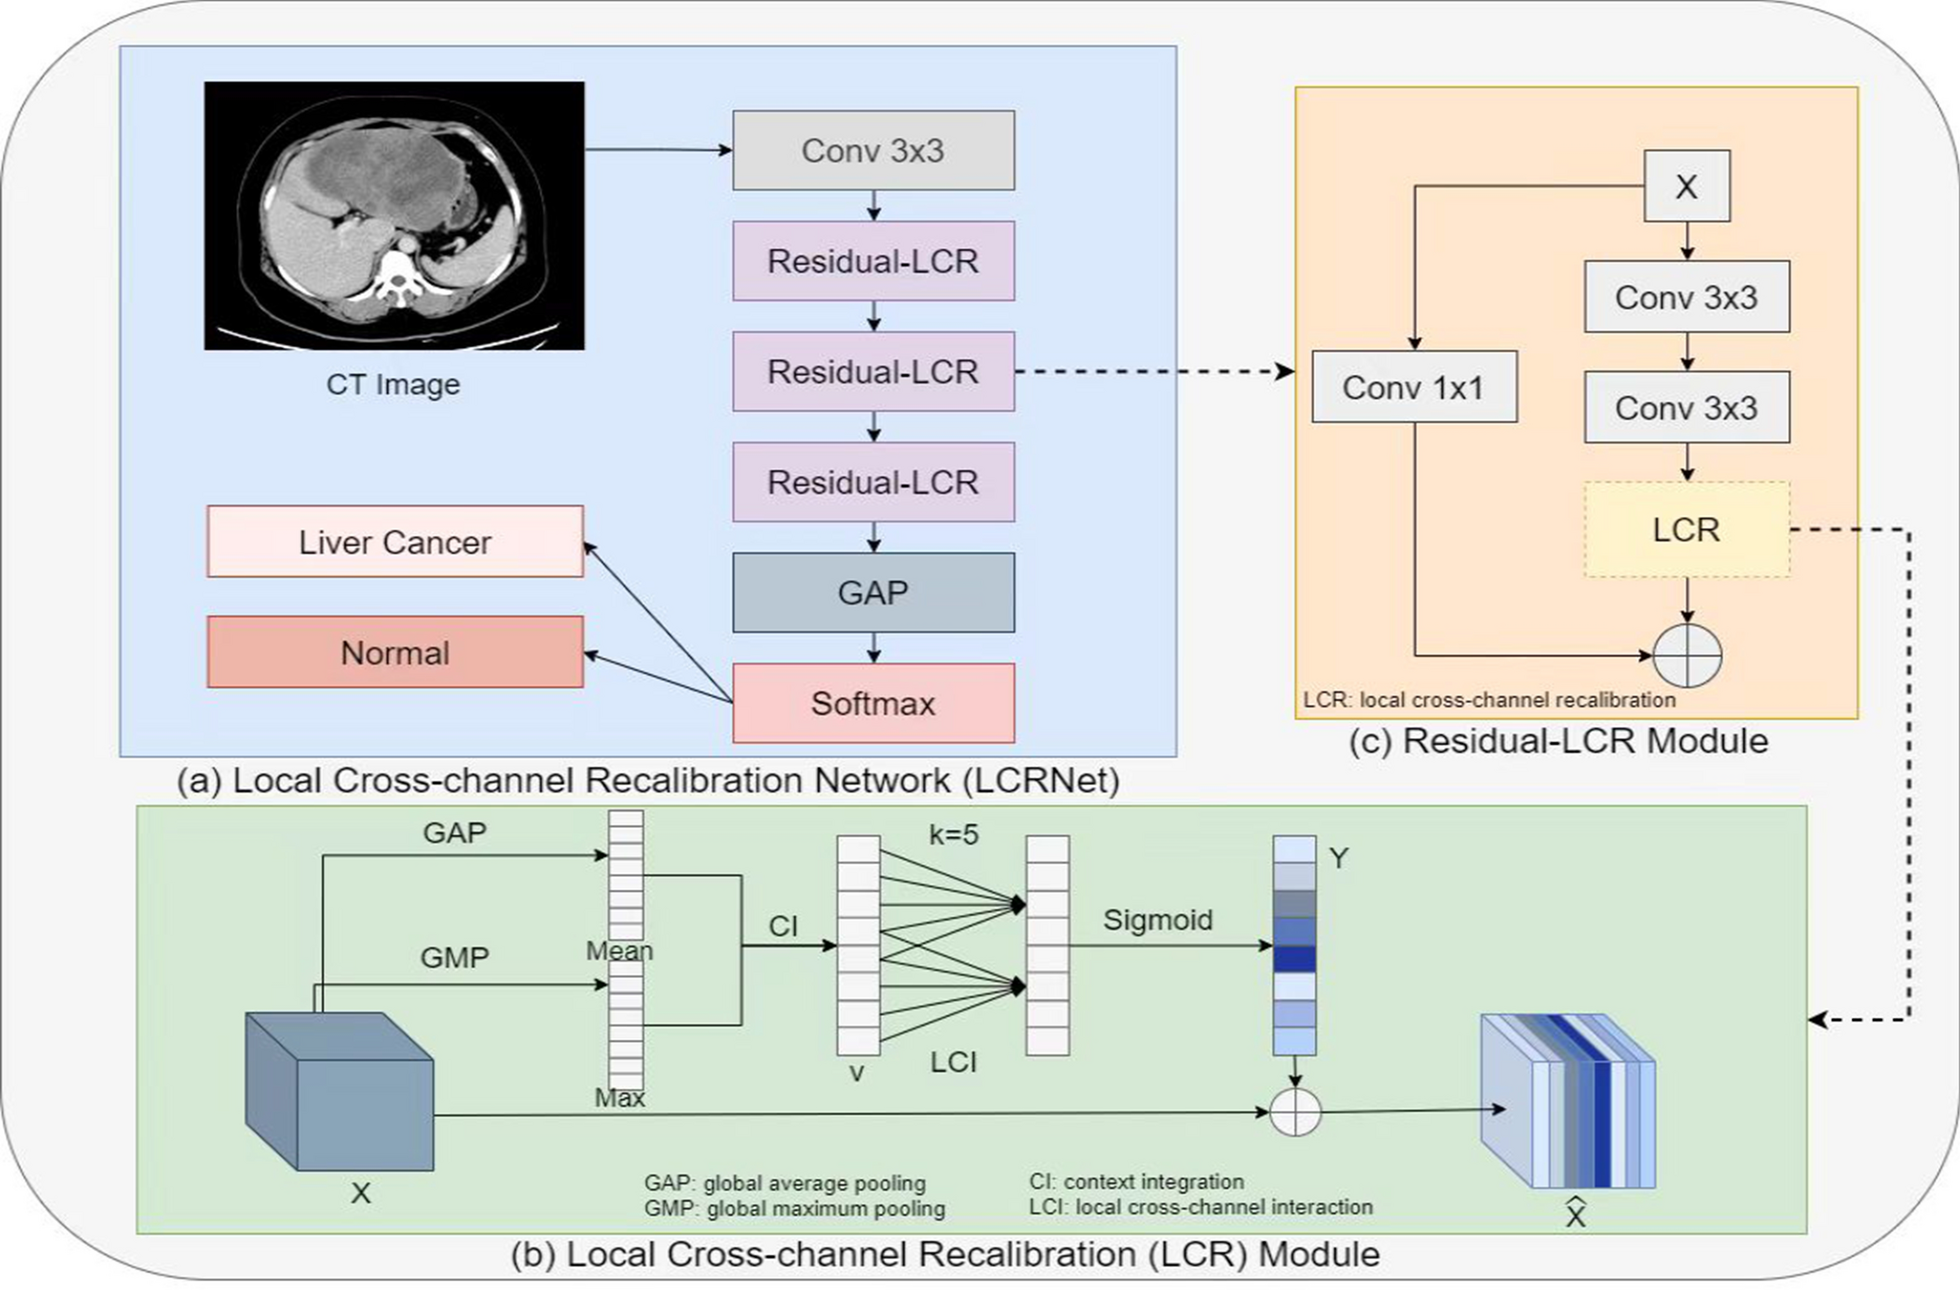 LCRNet: local cross-channel recalibration network for liver cancer classification based on CT images